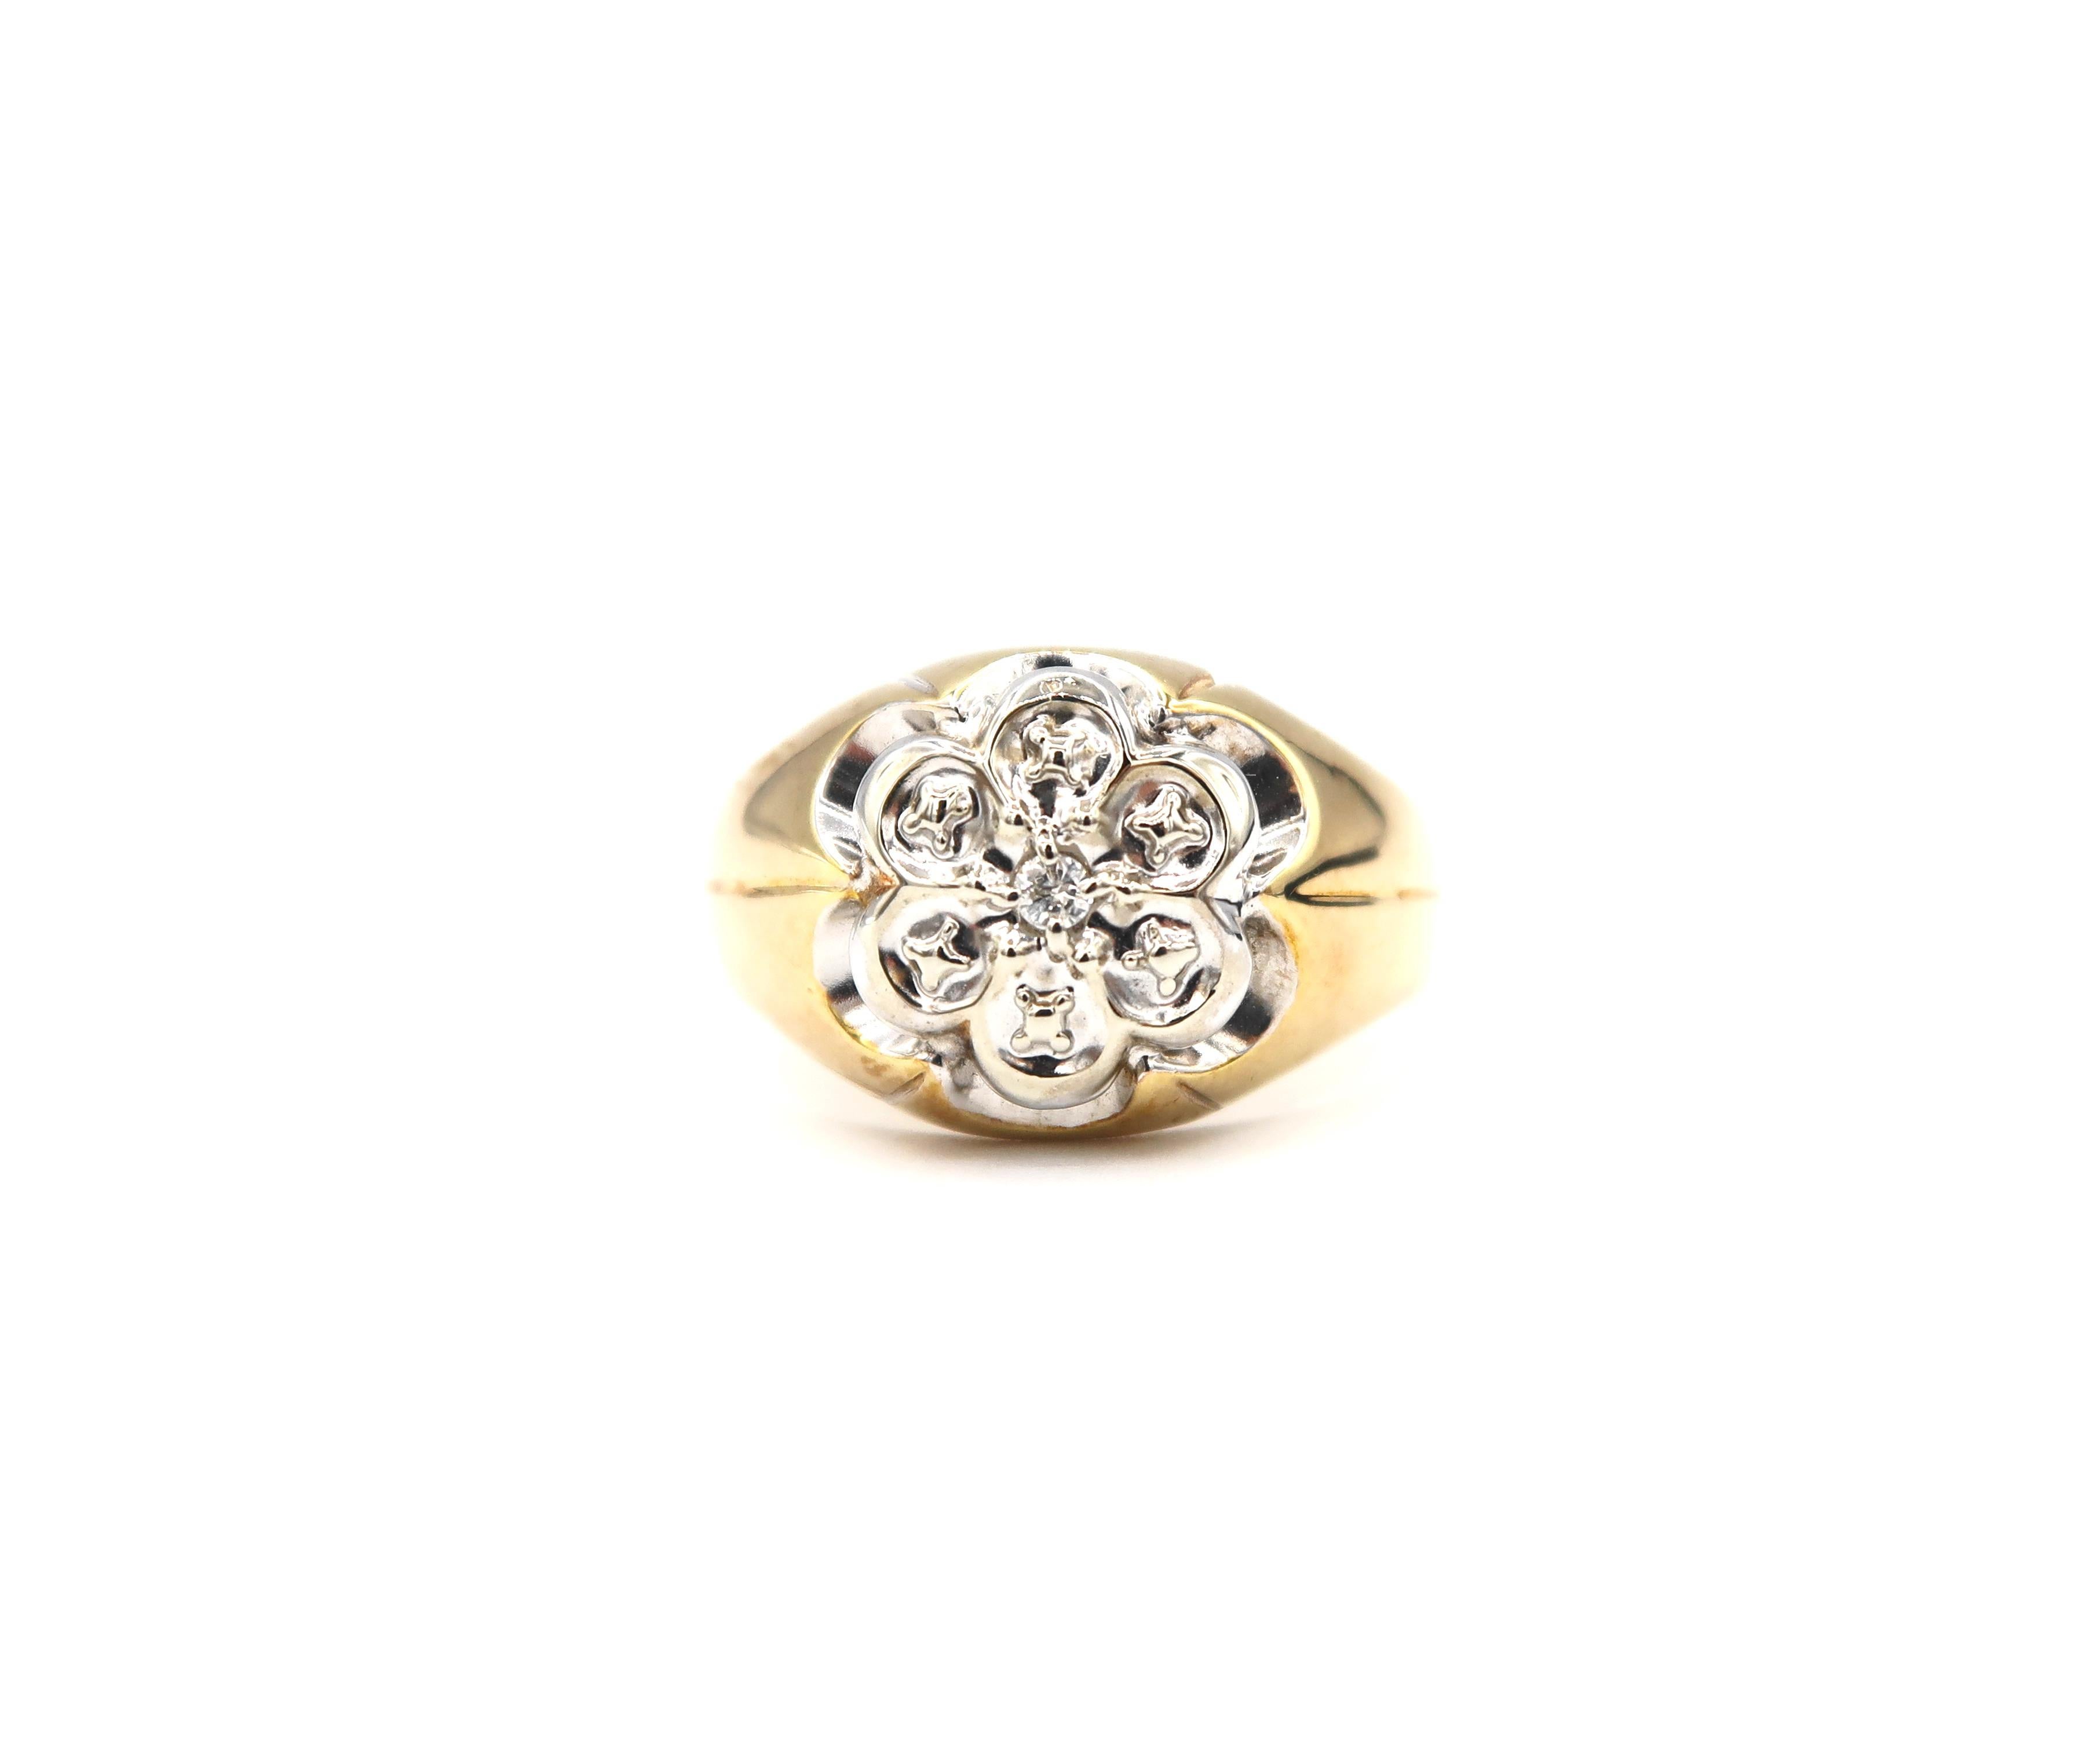 Traditional 6 Petals Mens Ring in 10 Karat Yellow Gold and White Gold with Centre Diamond

Please let us know should you wish to have the ring resized or engraved. 

Ring size: US 10, UK T

Gold: 10K 5.955g.
Diamond: 0.04ct.